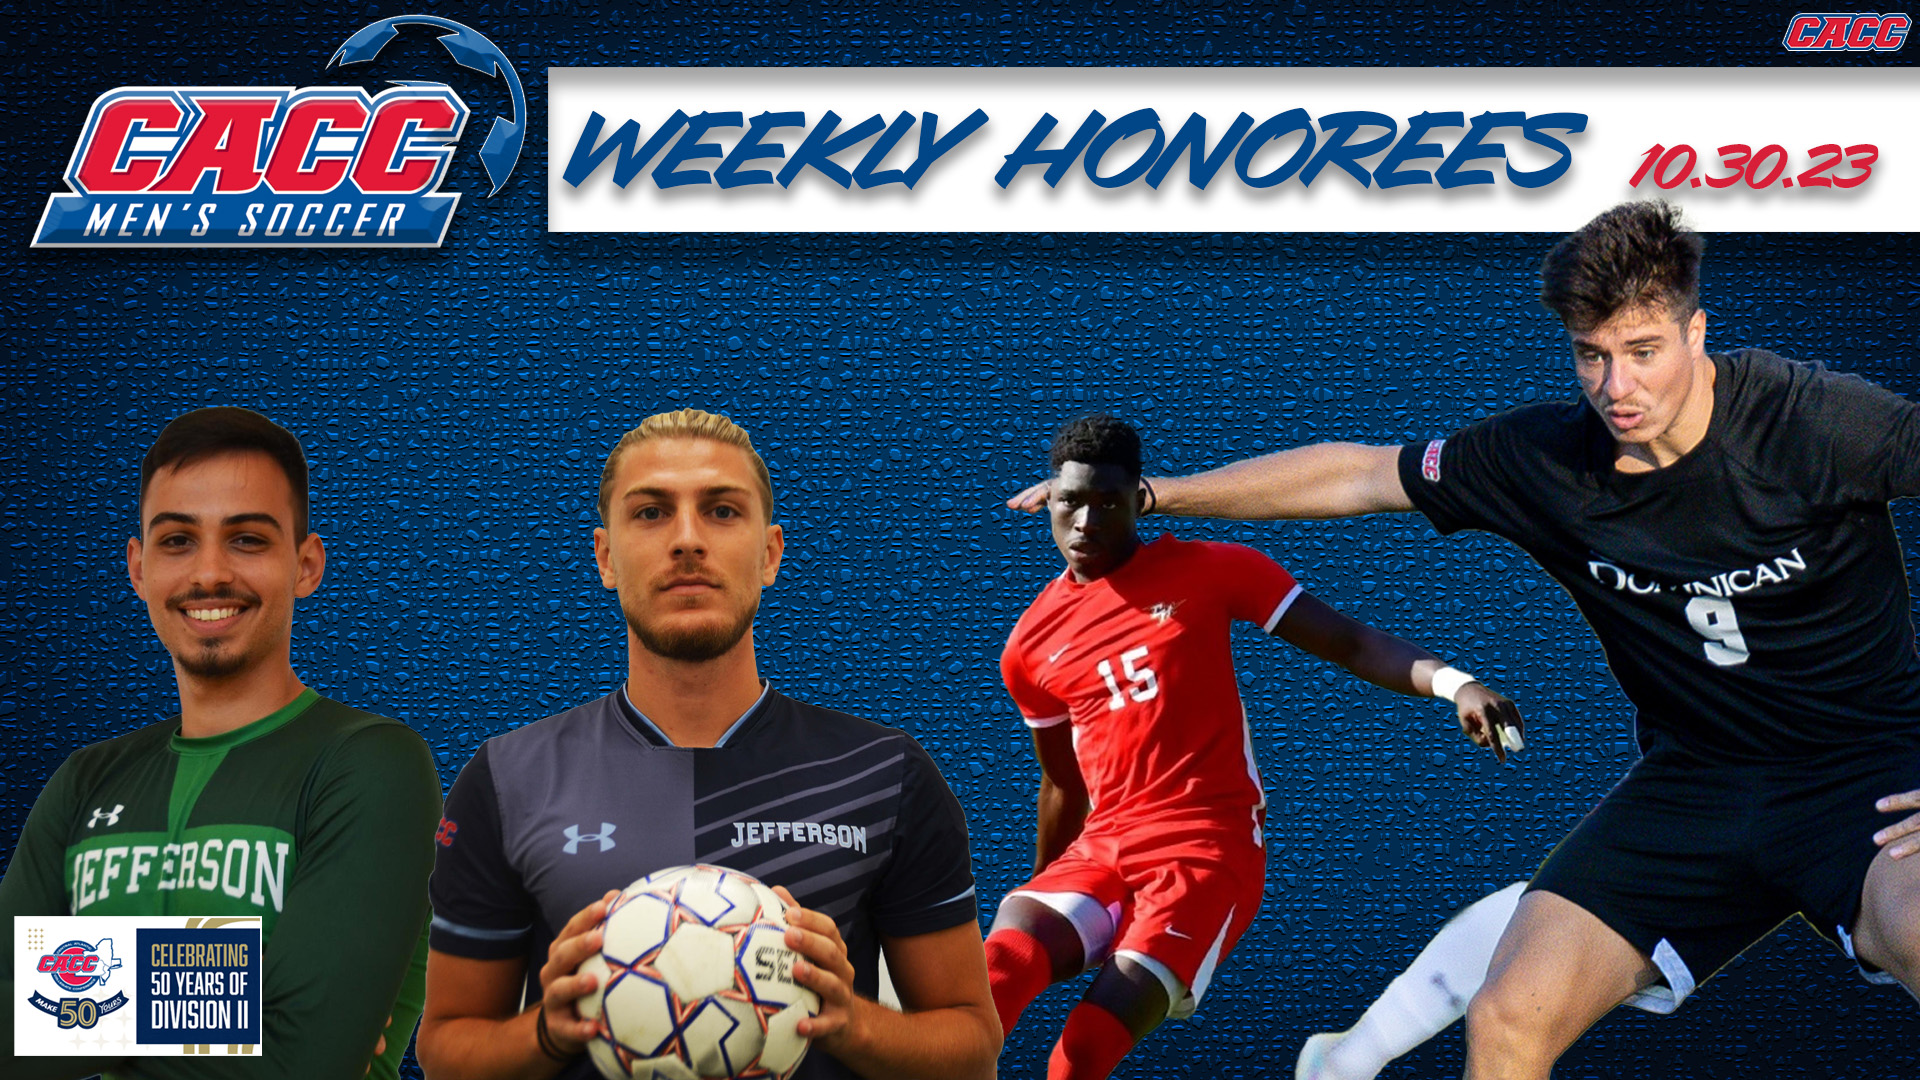 CACC Men's Soccer Weekly Honorees (10-30-23)